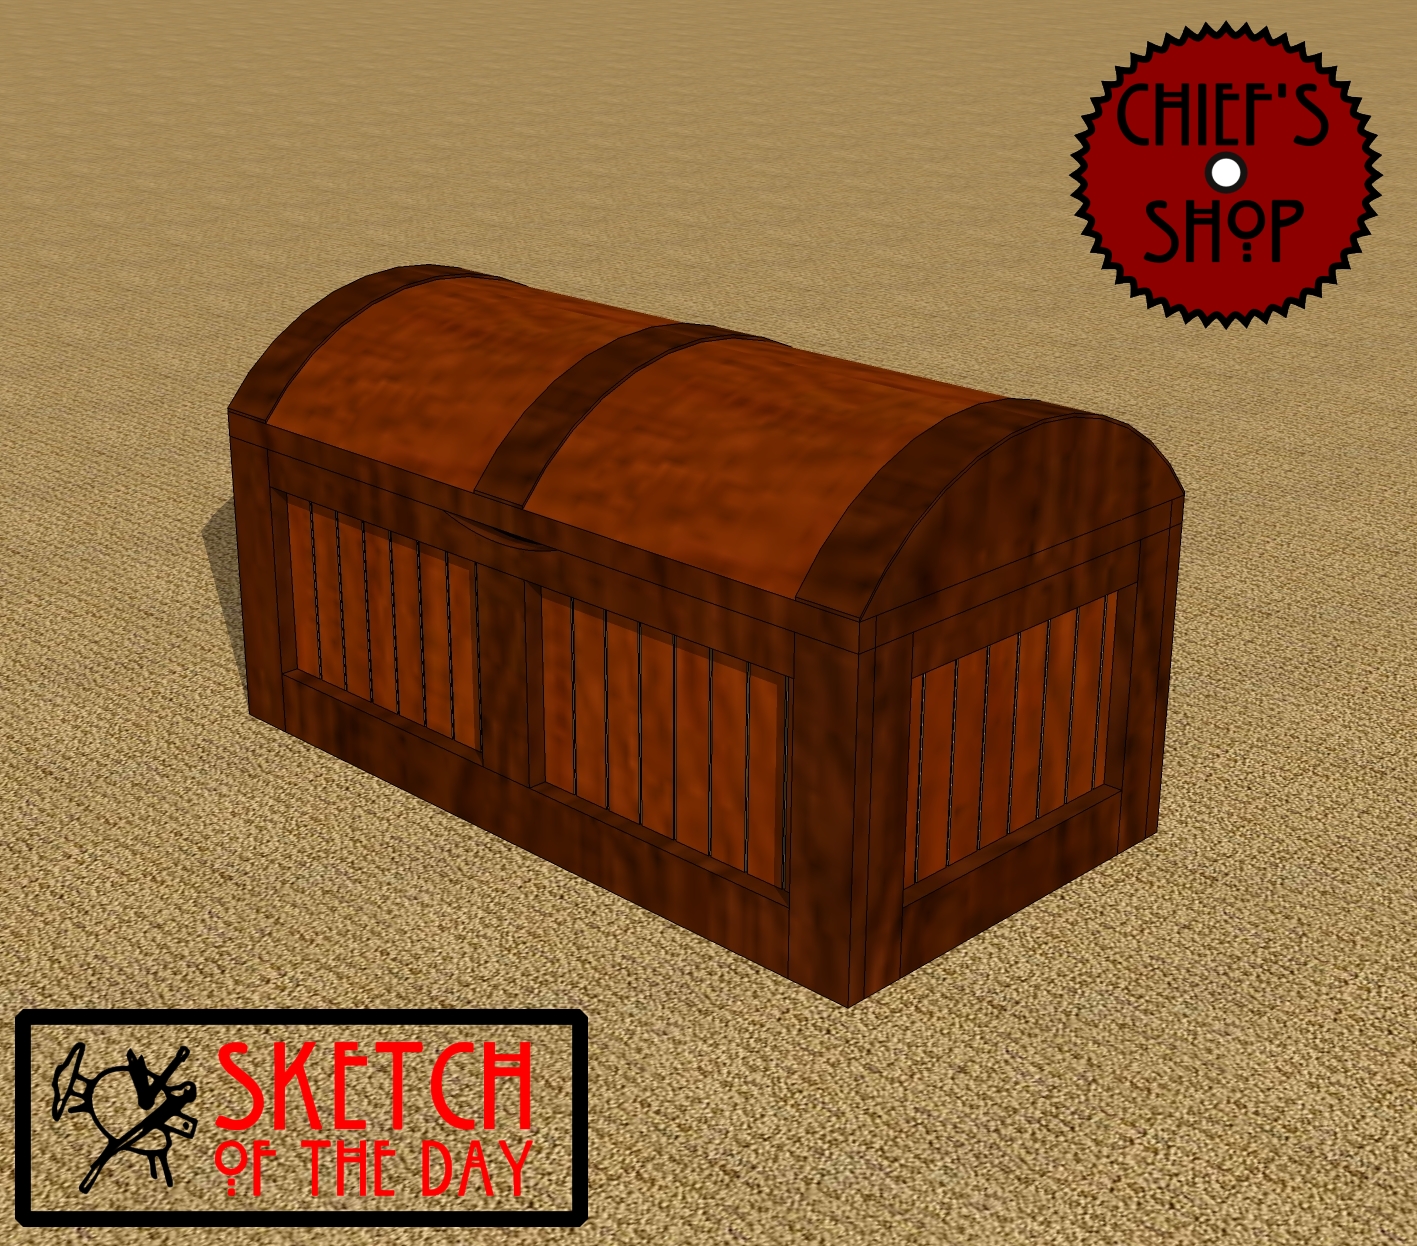 storage chest concept with a slight “pirate” look to it.